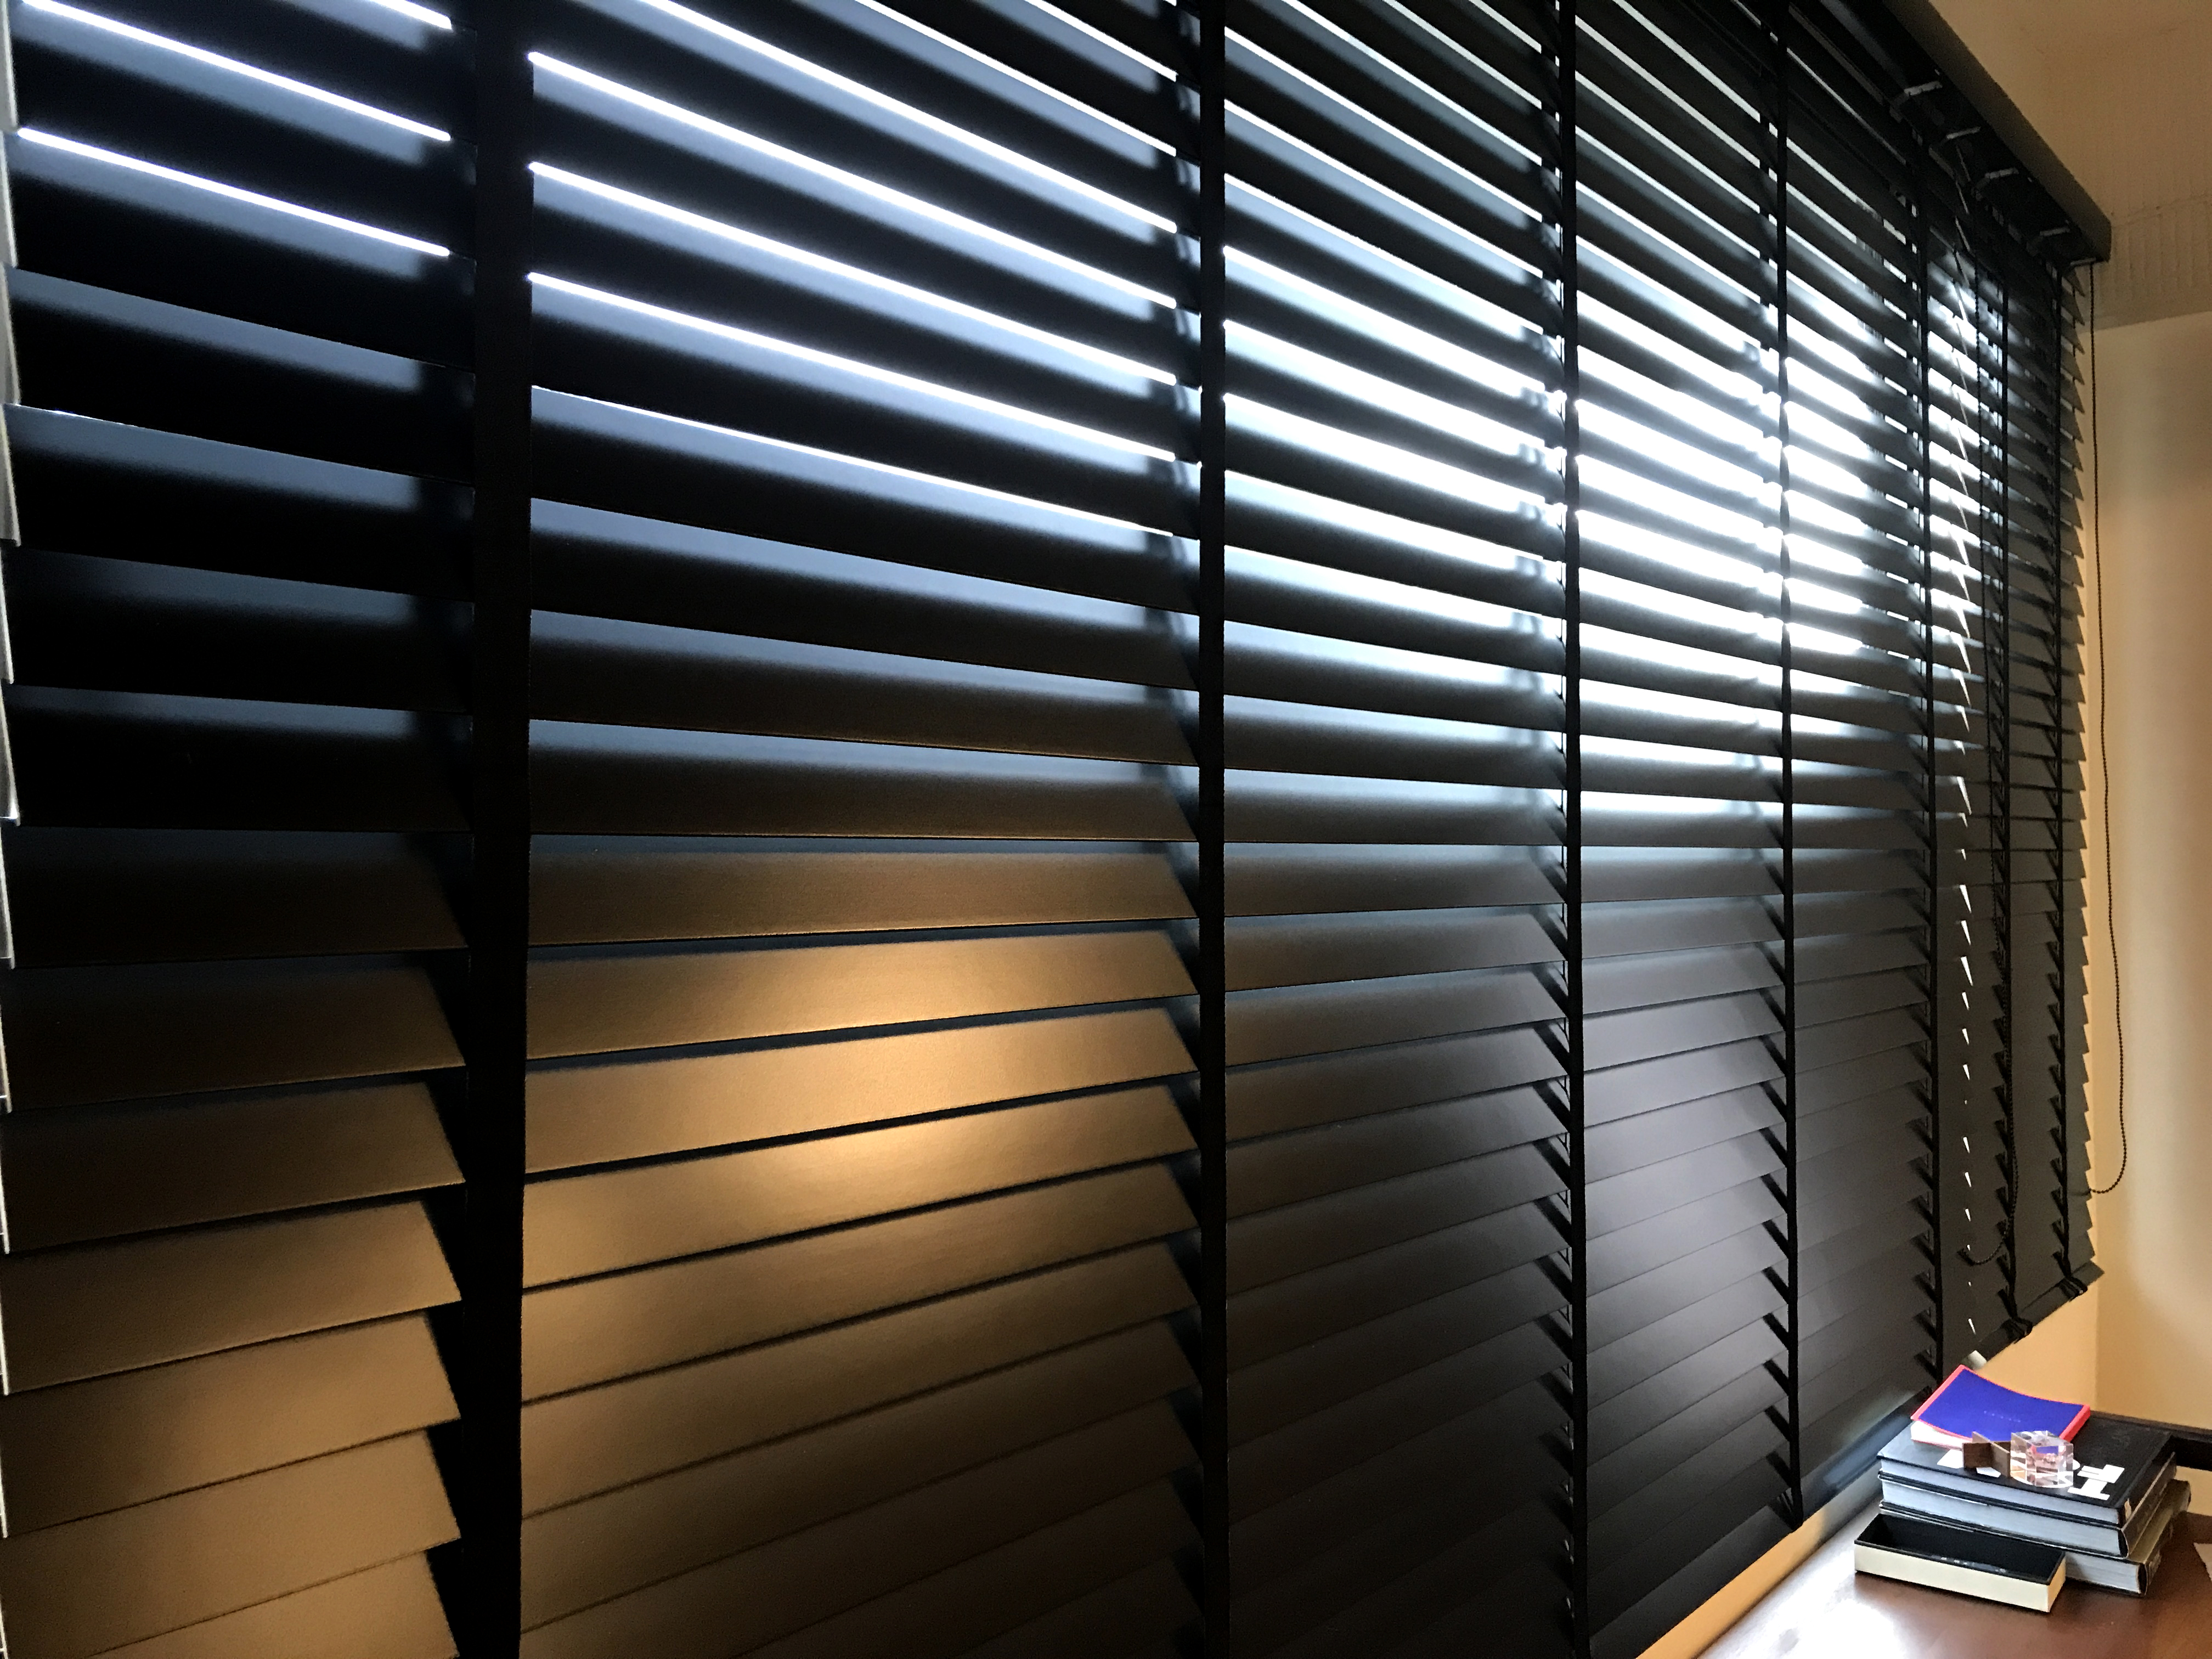 Lavelle Venetian Blinds　Wood 252 Black Ventilated Blinds & Shades Customized／Personalized Blinds & Shades Light Filtering Blinds & Shades Light-Regulating Blinds & Shades Motorized Blinds／Smart Blinds & Shades